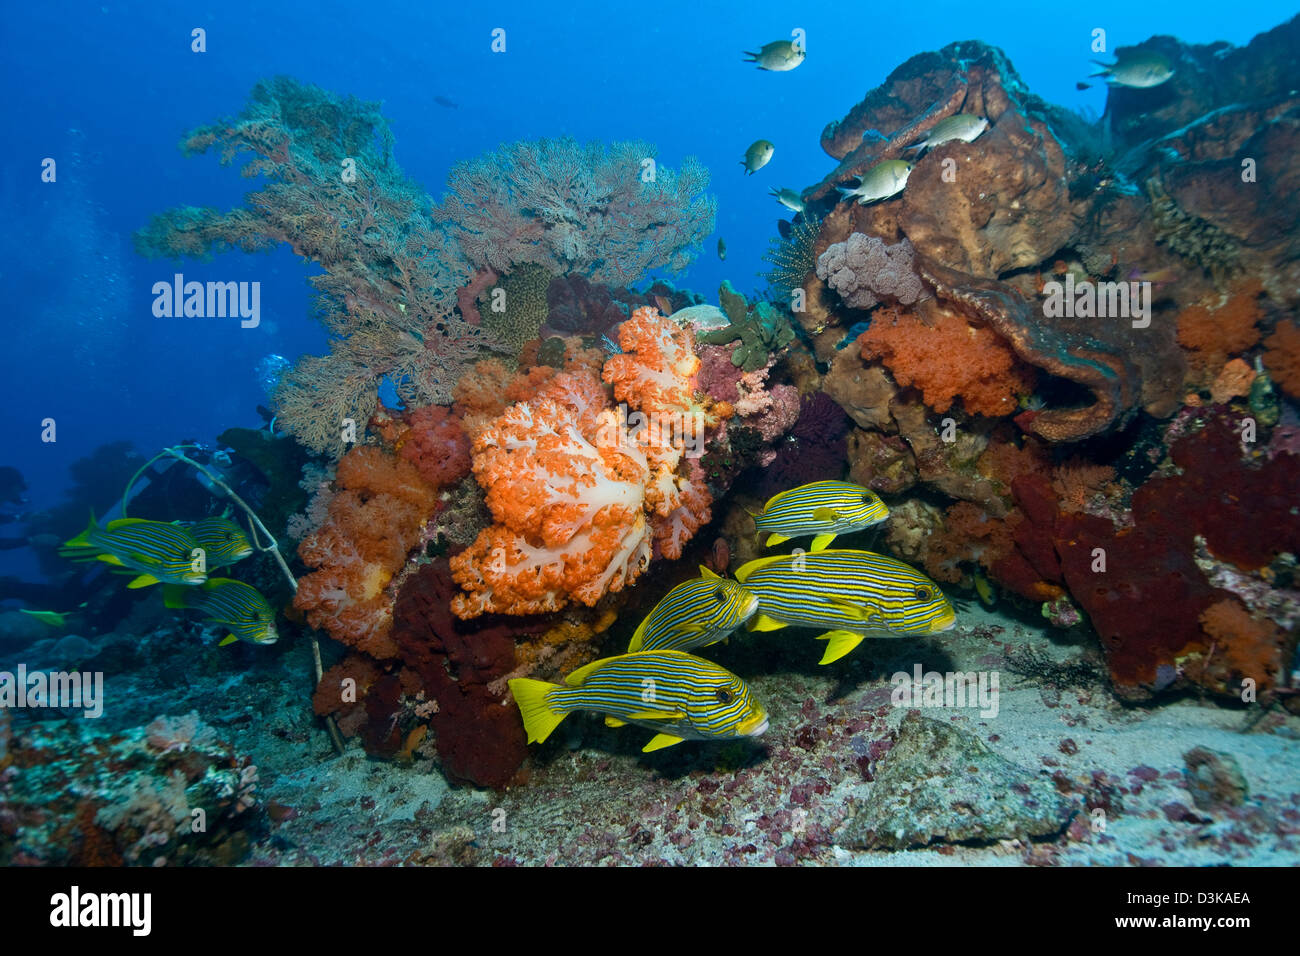 Orange soft coral, yellow gorgonian sea fan and yellow and blue striped sweeltip fish, Komodo, Indonesia. Stock Photo